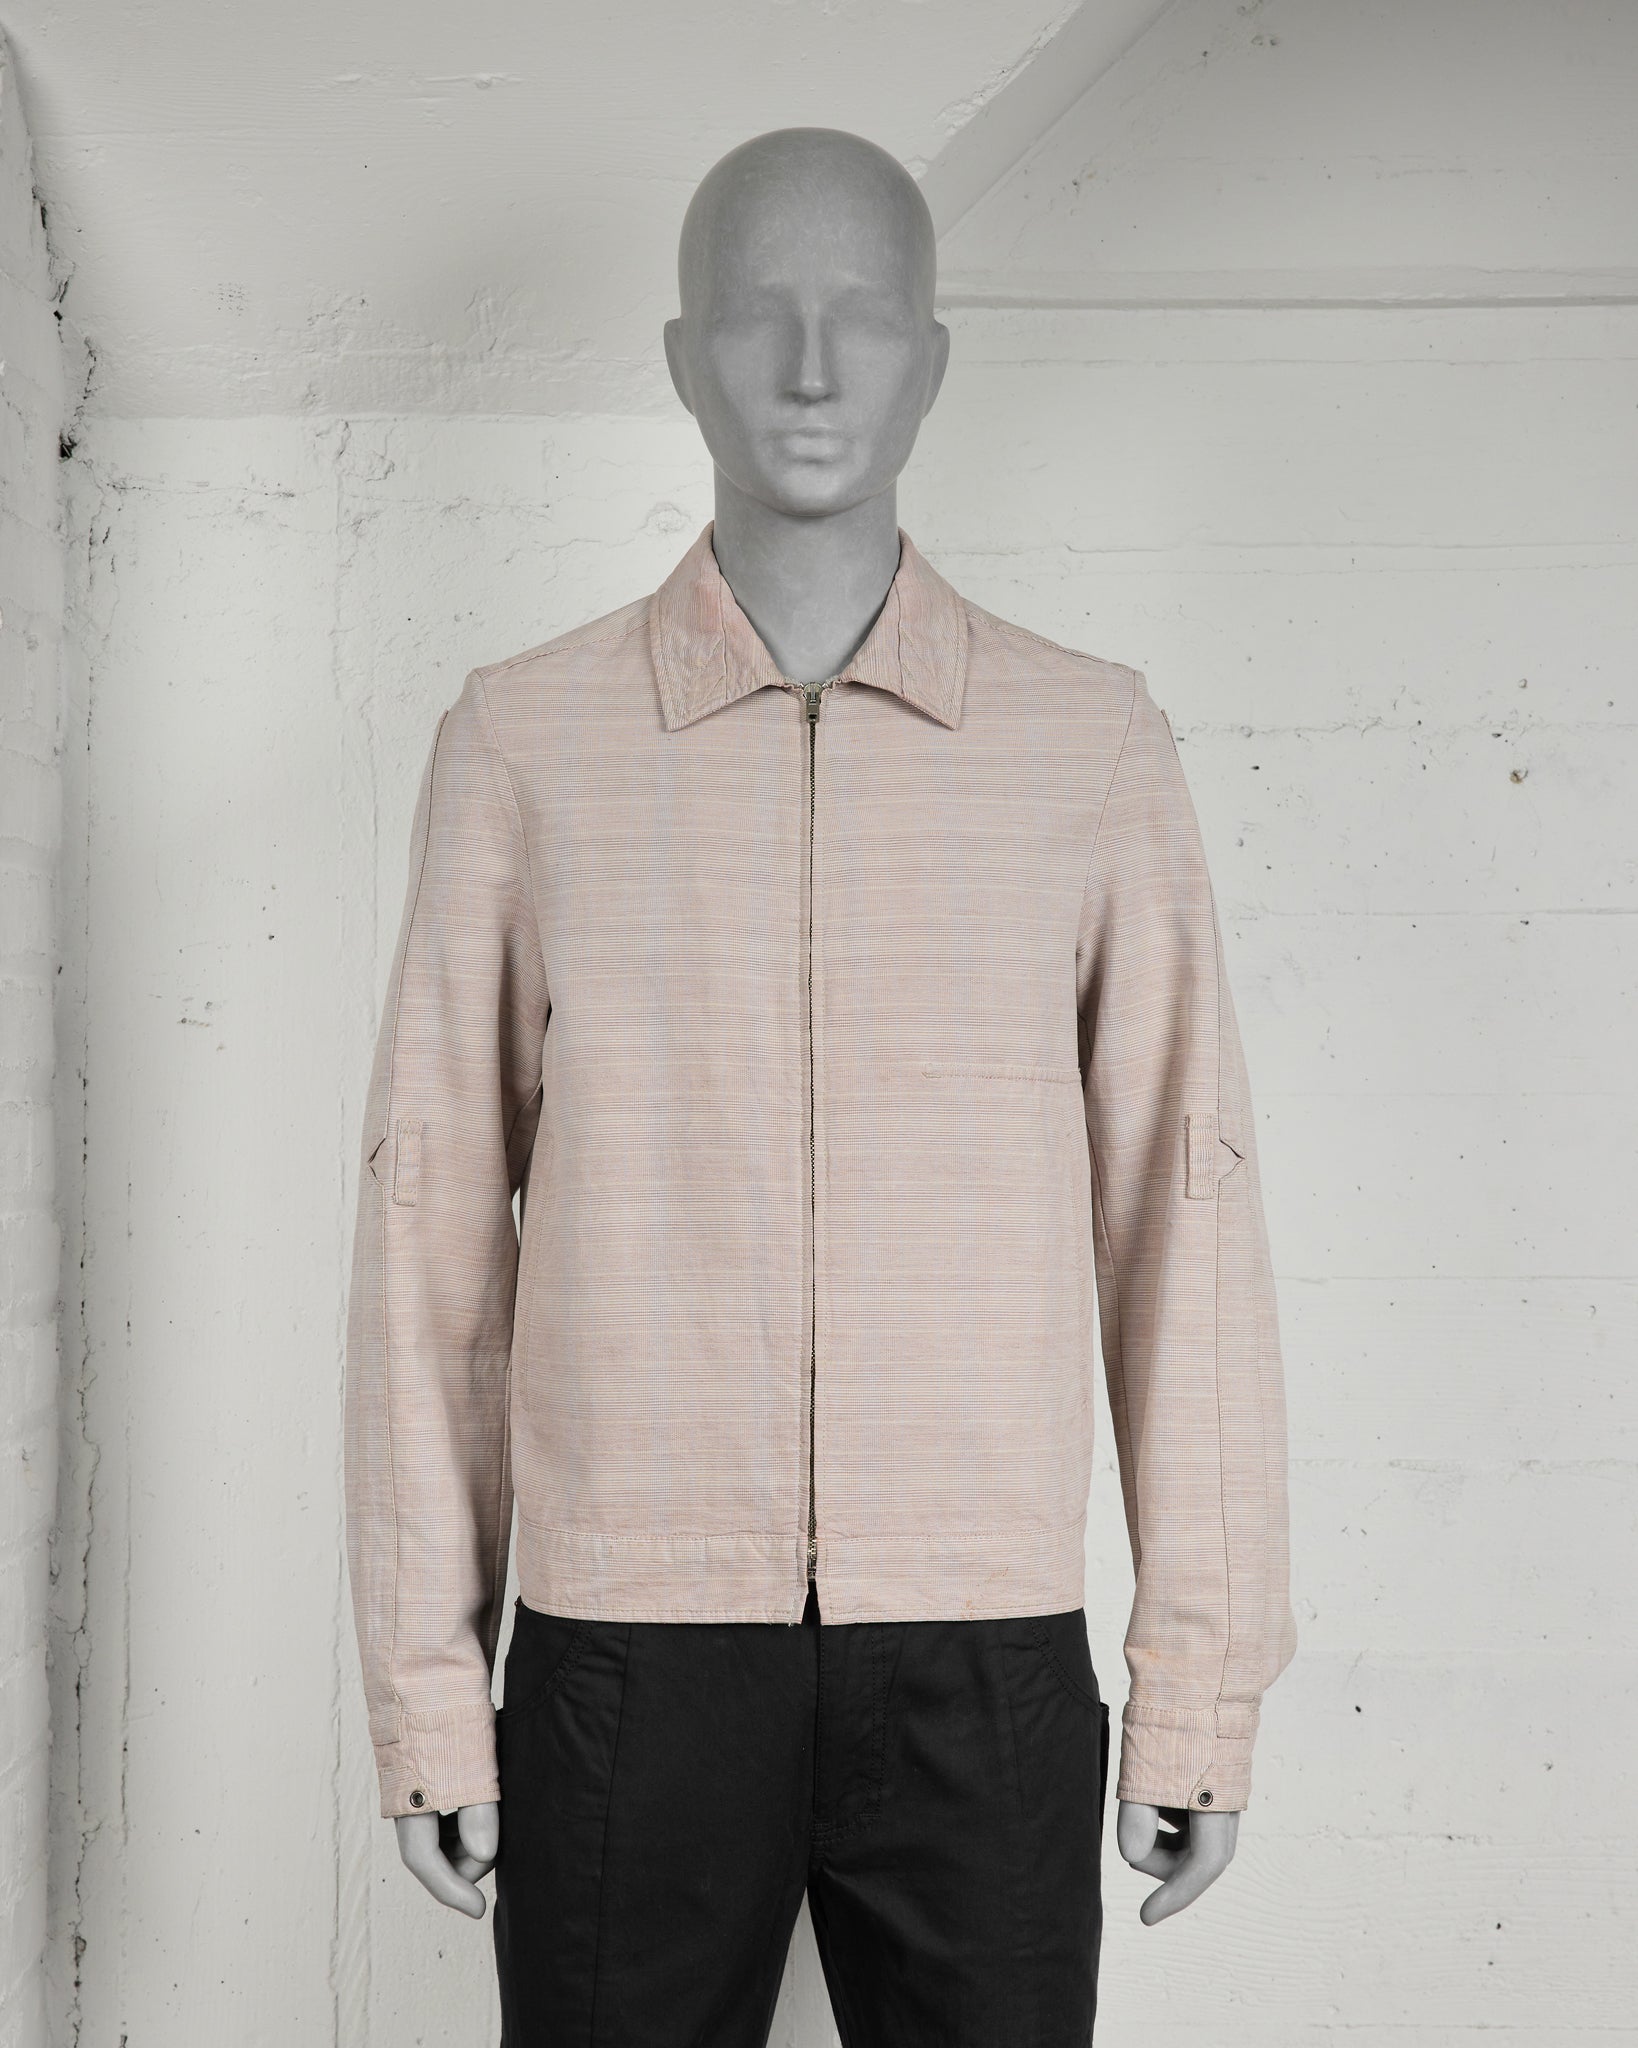 Hussein Chalayan Micro Striped Plaid Work Jacket - SS05 "Act to Institution"